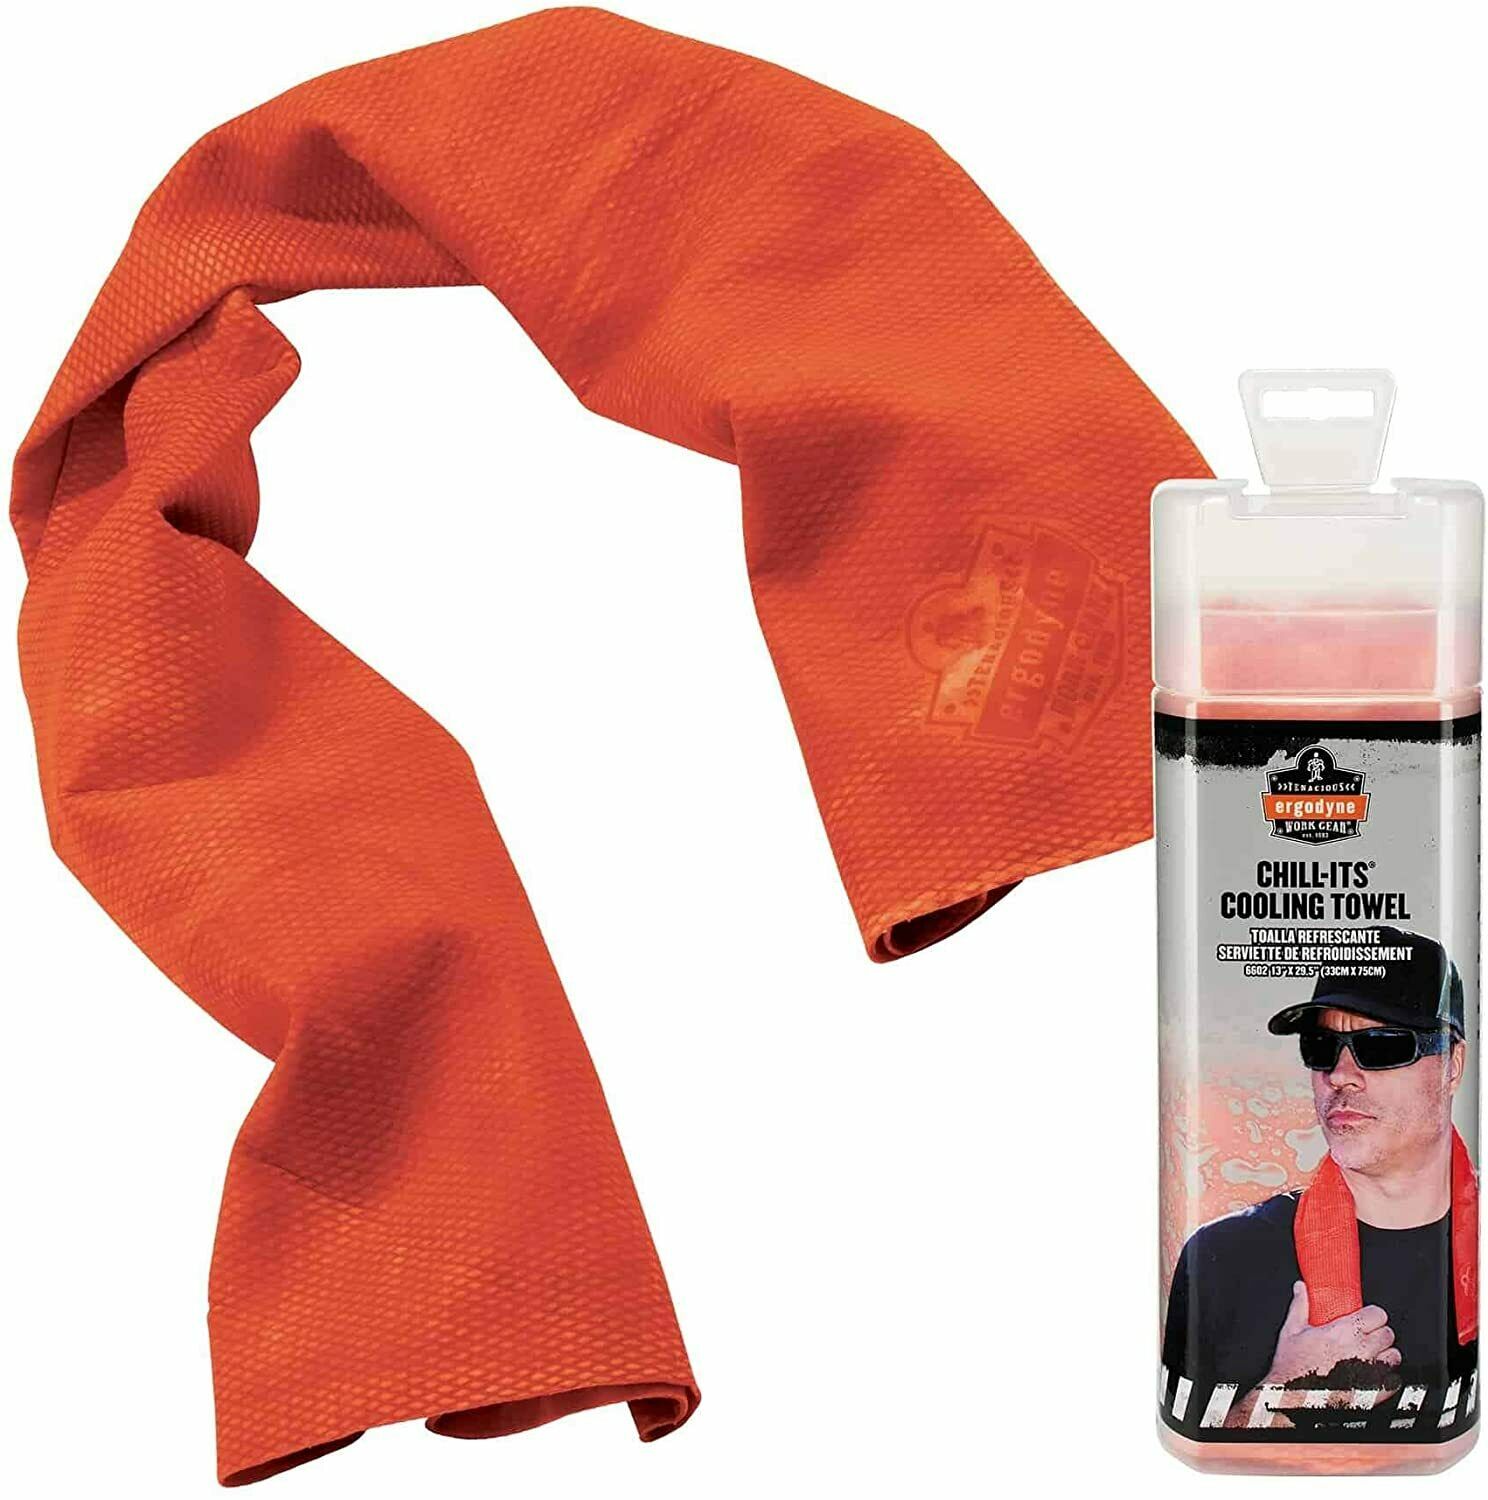 Ergodyne Chill Its 6602 Cooling Towel, Long Lasting Cooling Relief Blue, Orange